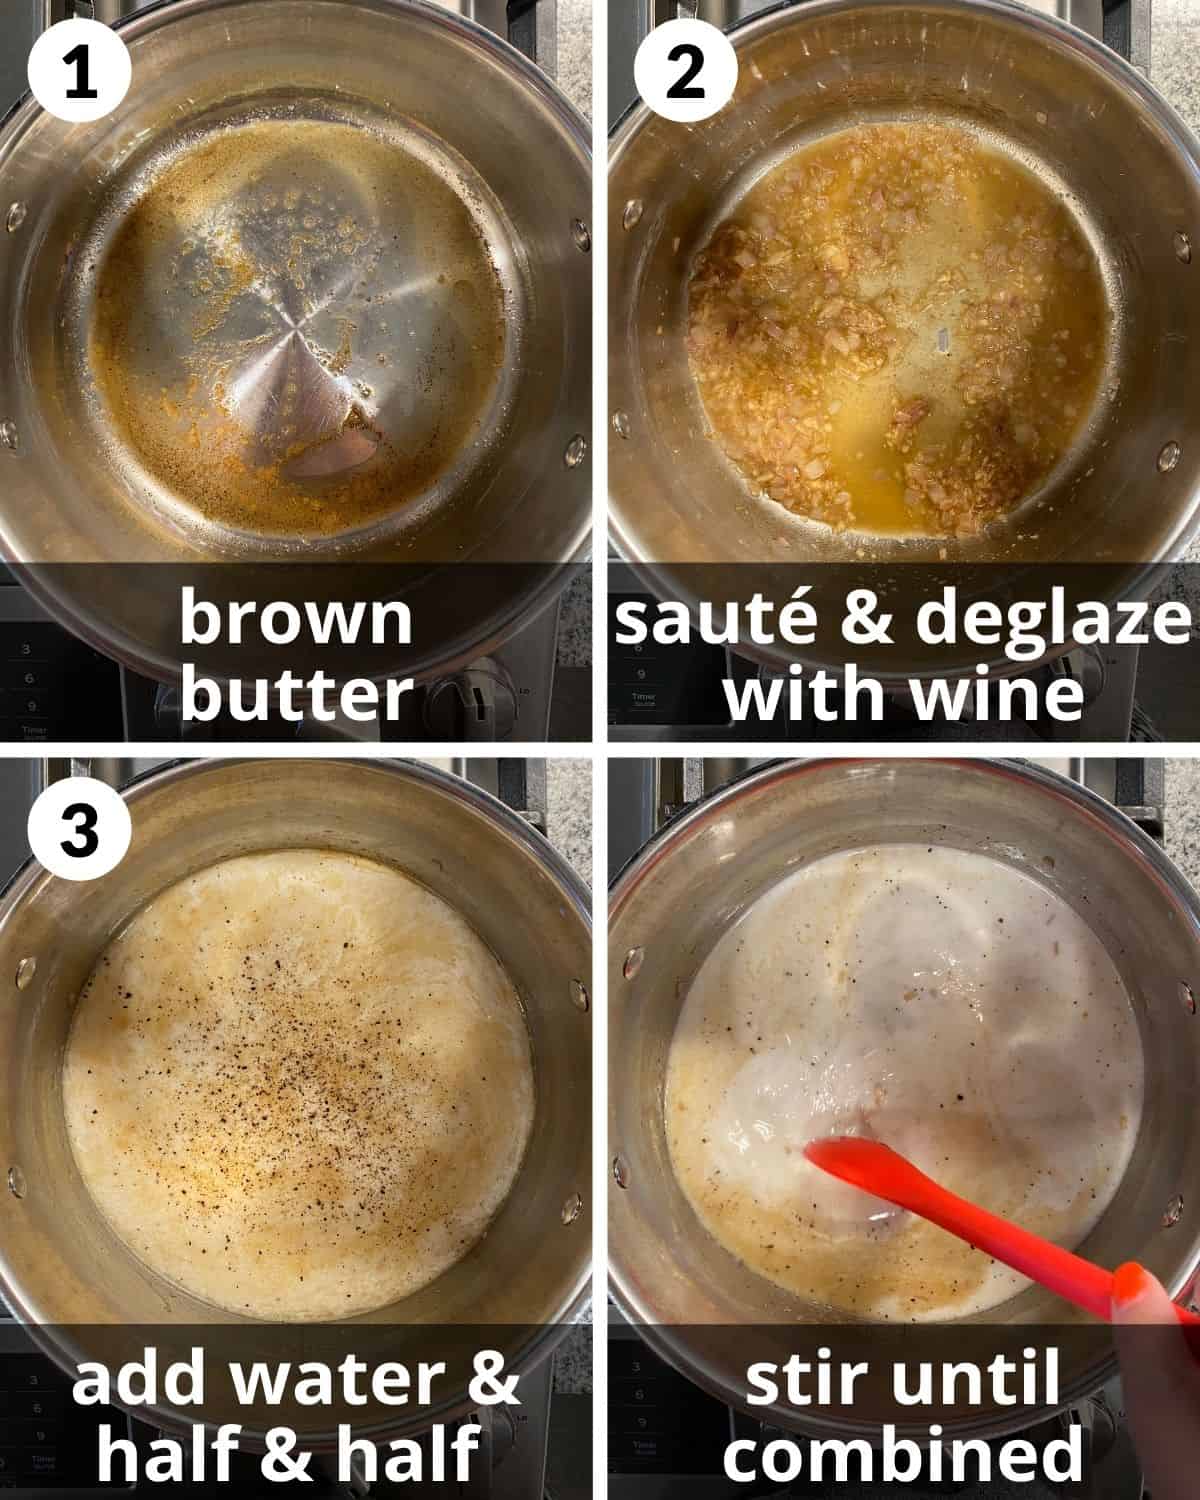 4 photos. Butter browned.